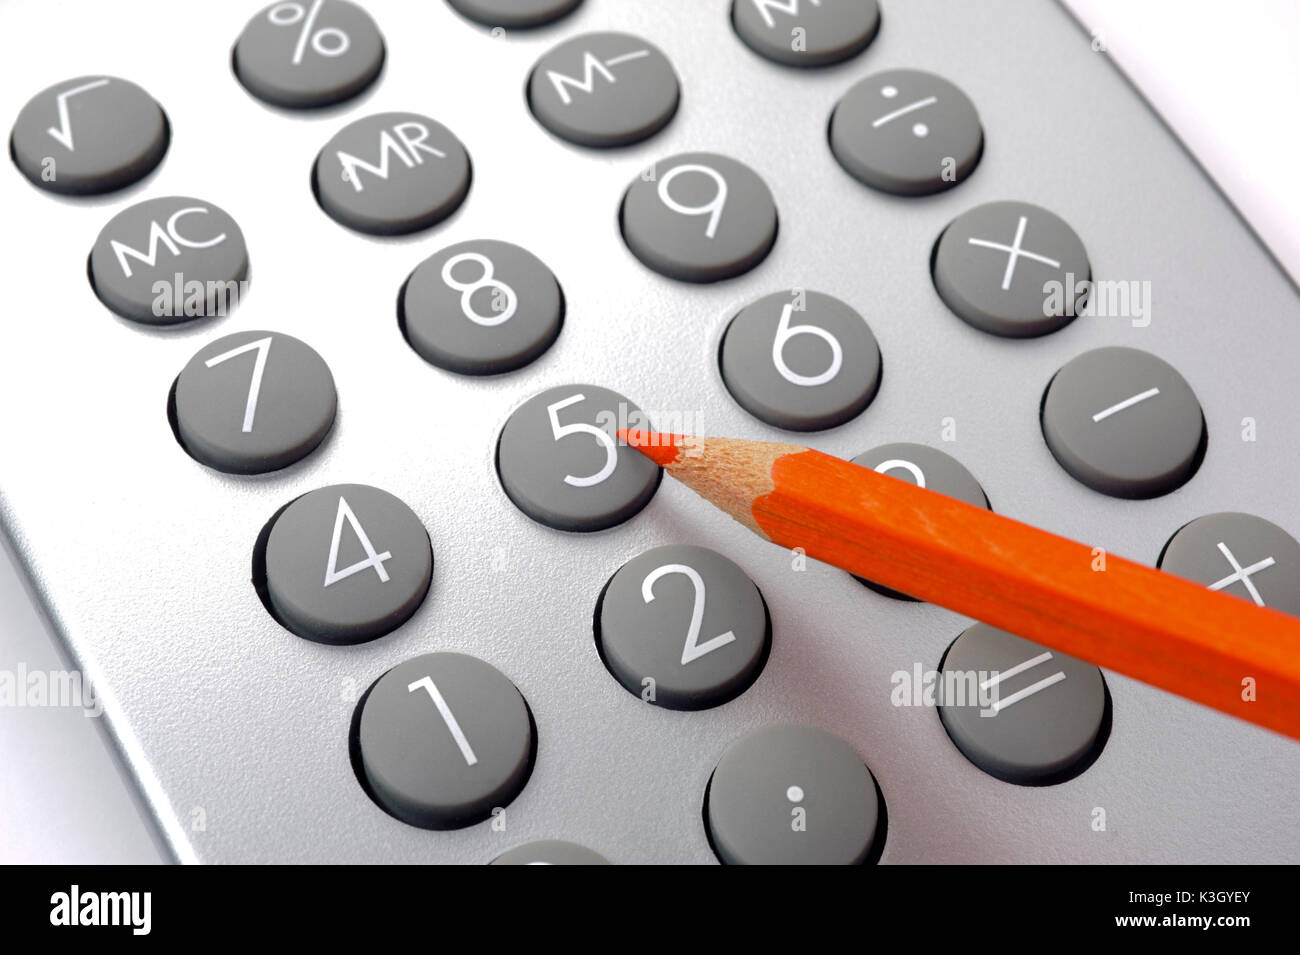 Saving with red pen and electronic calculator Stock Photo